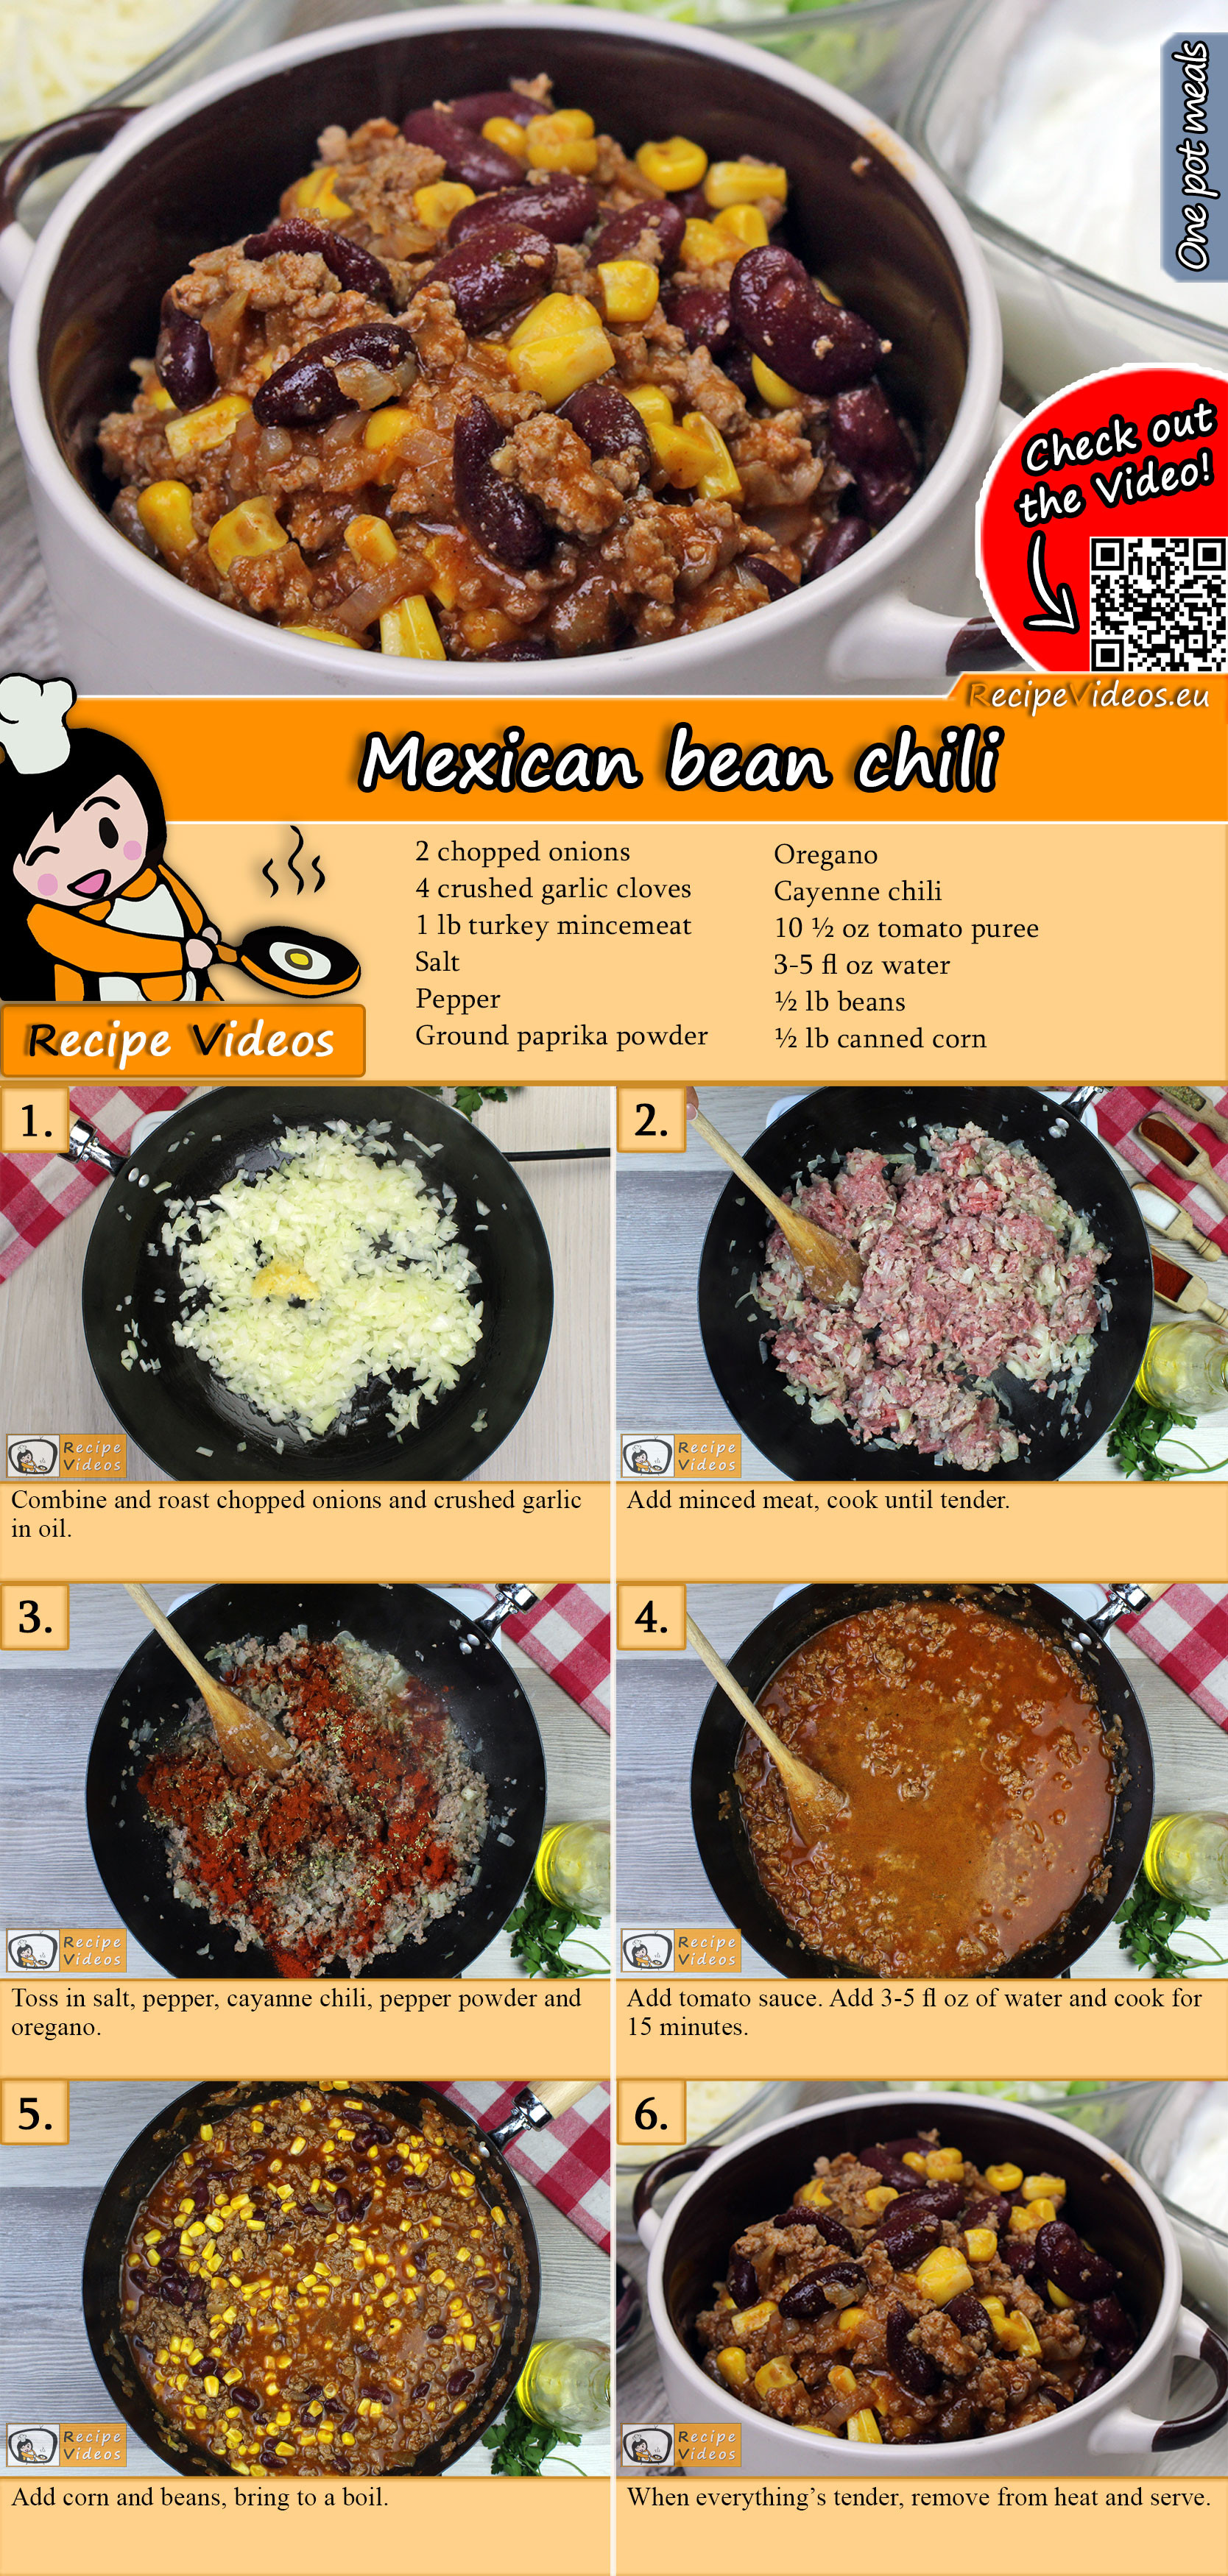 Mexican bean chili recipe with video